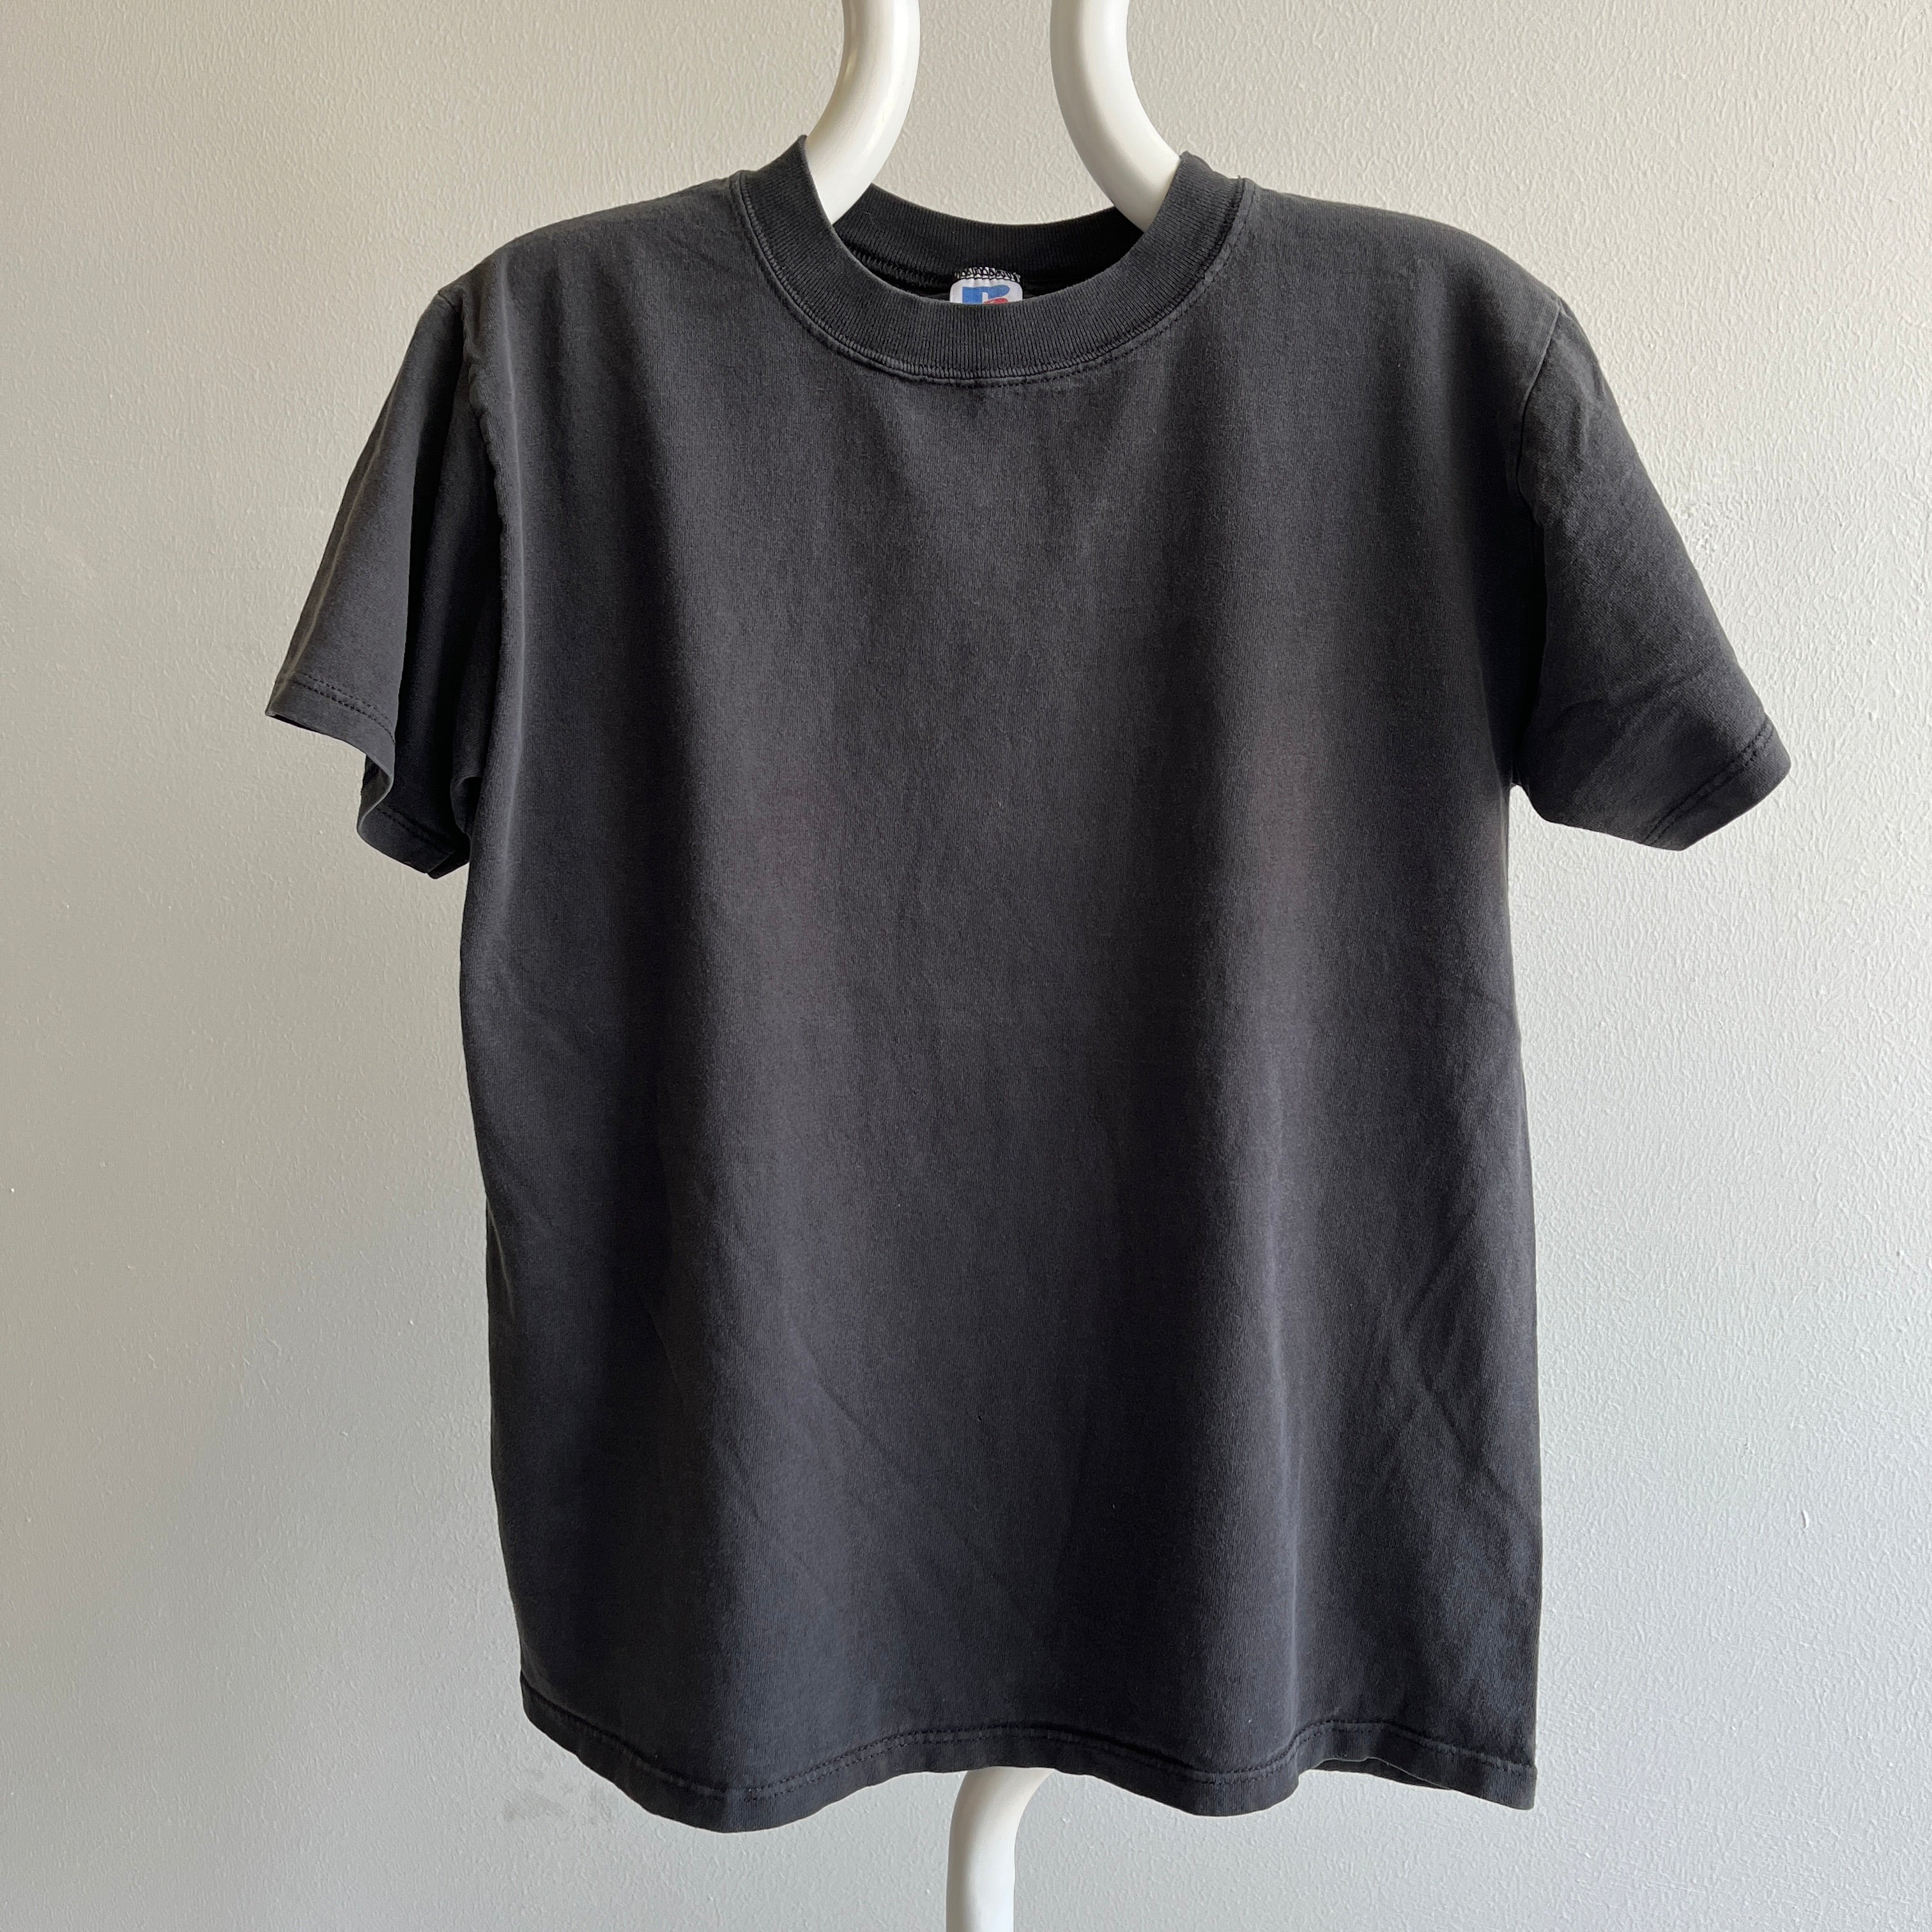 1980/90s Faded Blank Black T-Shirt by Russell